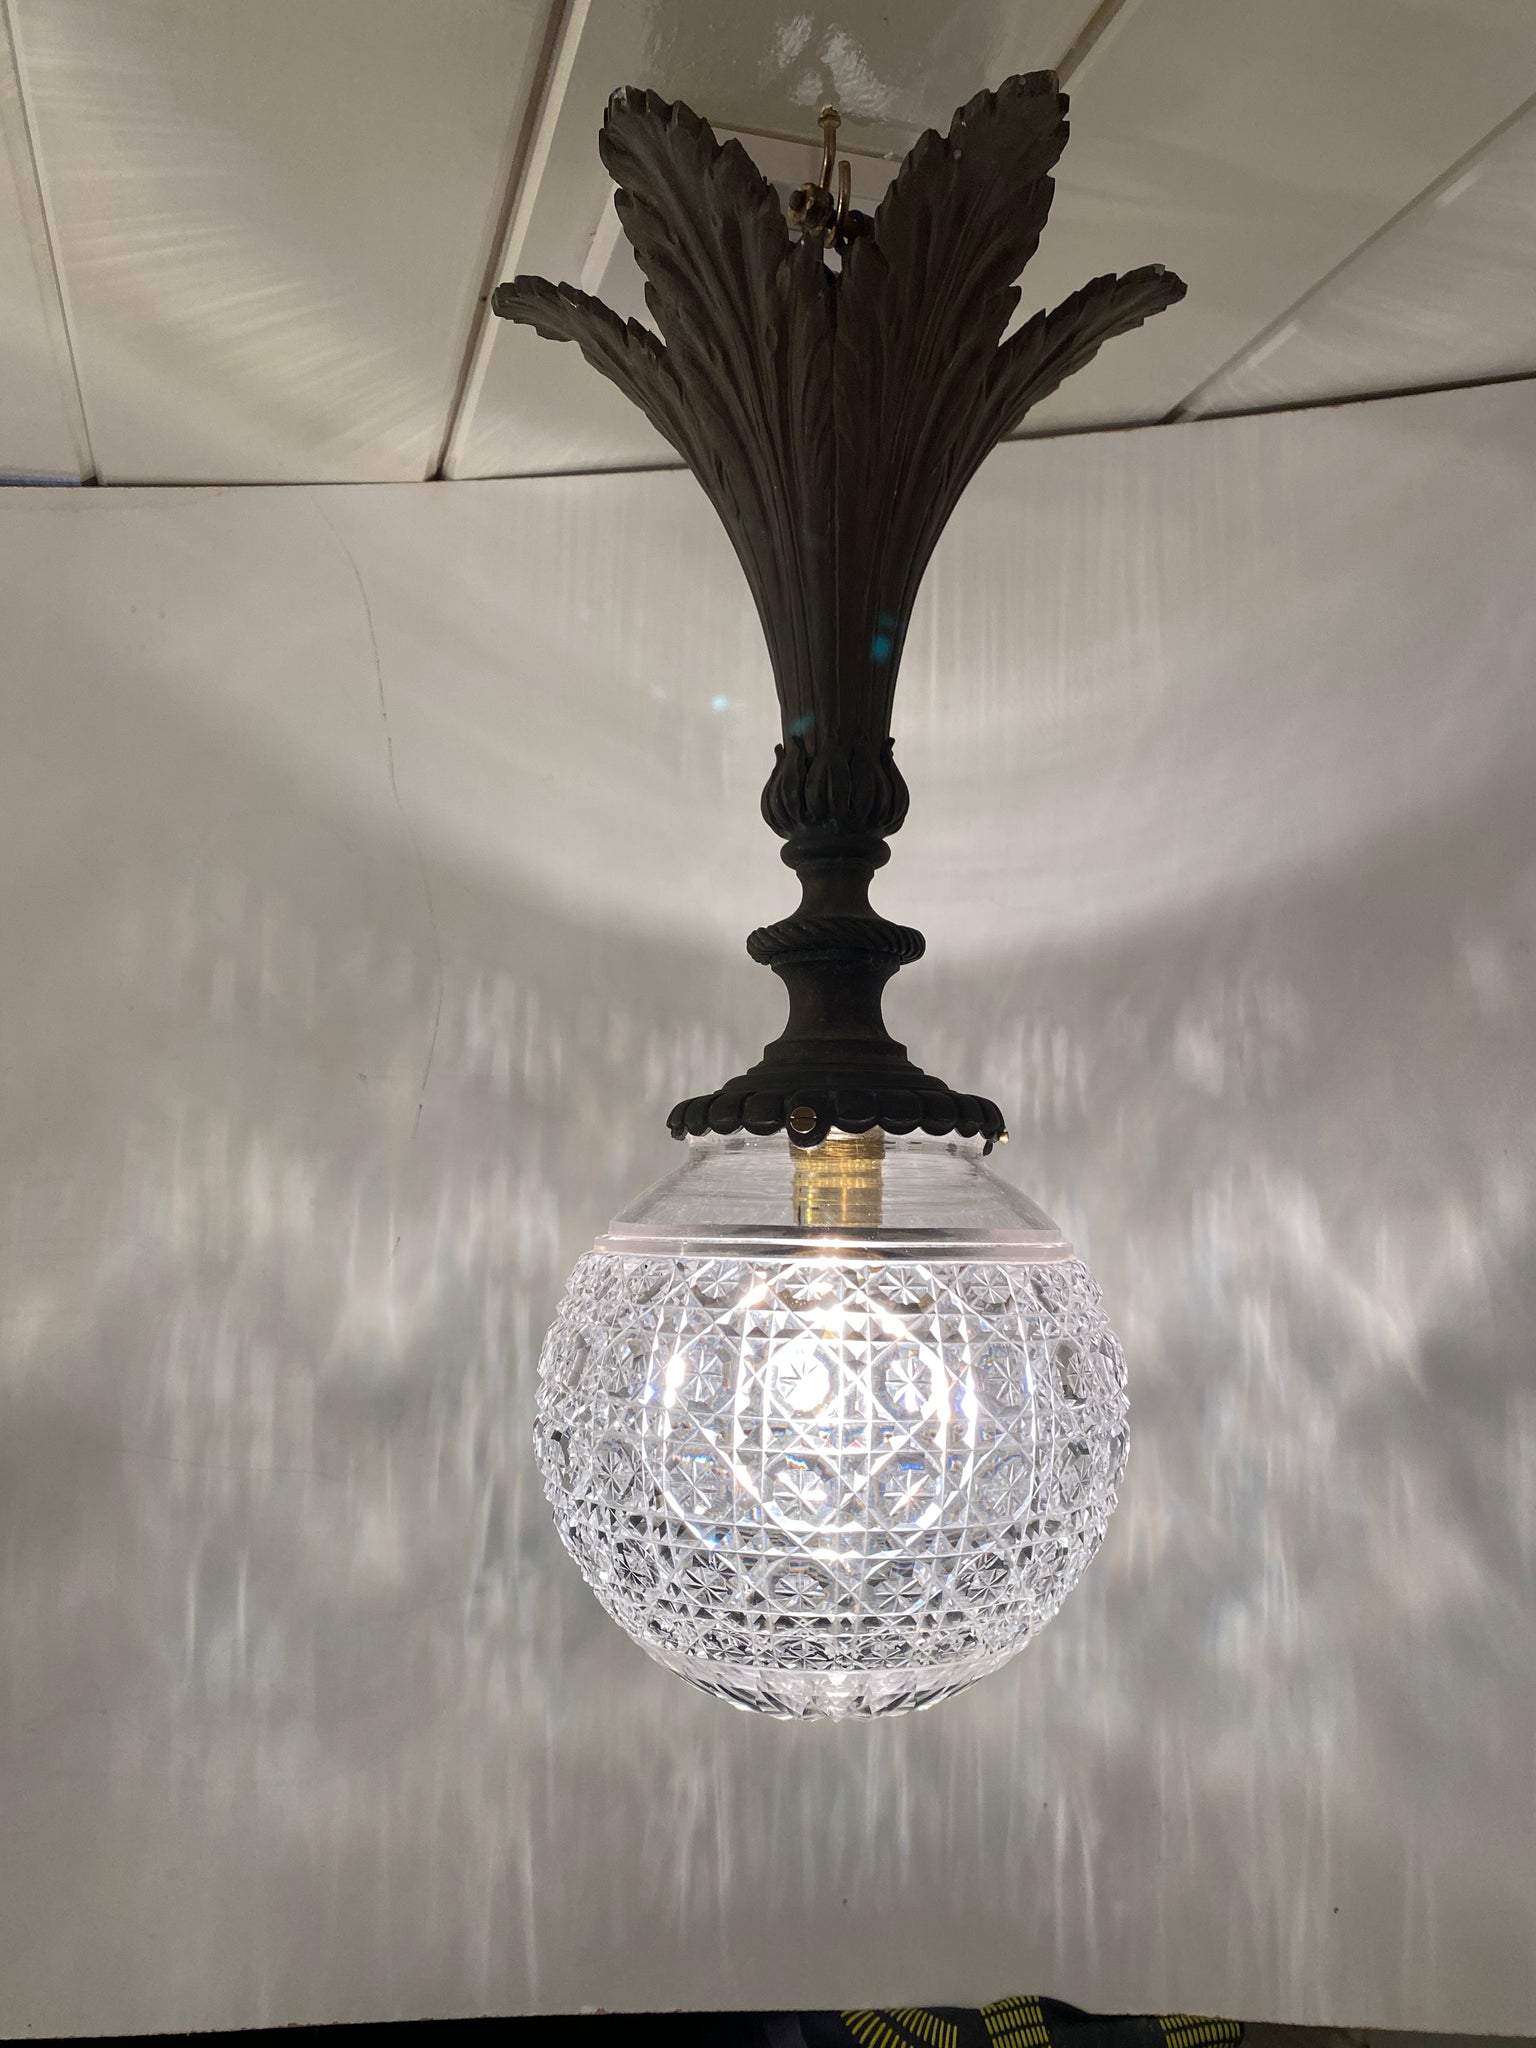 Cut Crystal Pendant Lamp on Brass Pineapple Leaf Electrical Fitting C.1920